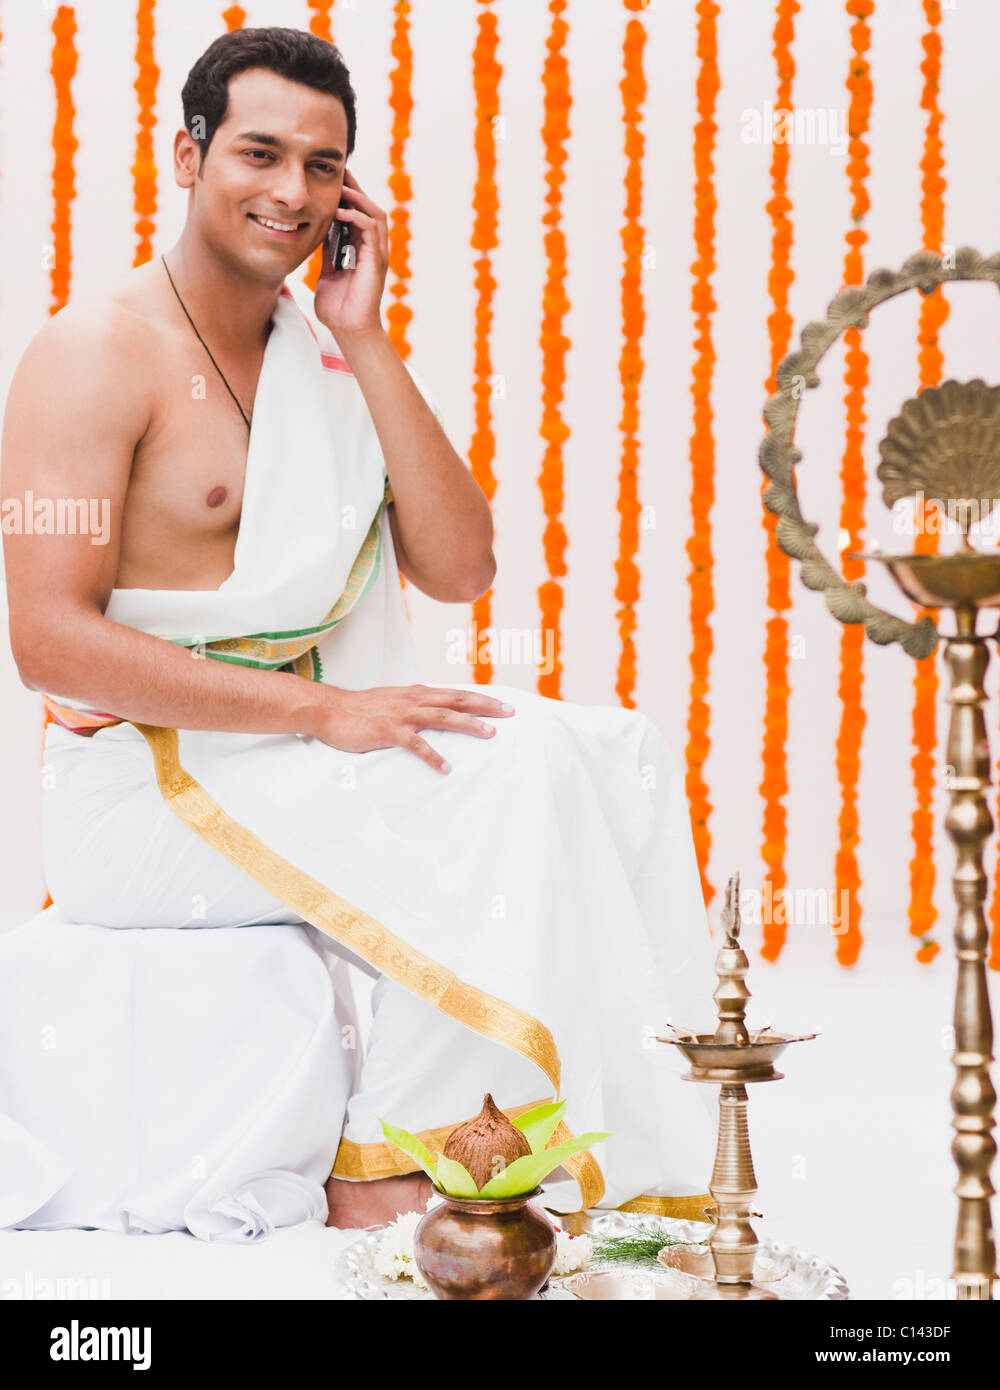 Man talking on a mobile phone in traditional South Indian dress Stock Photo